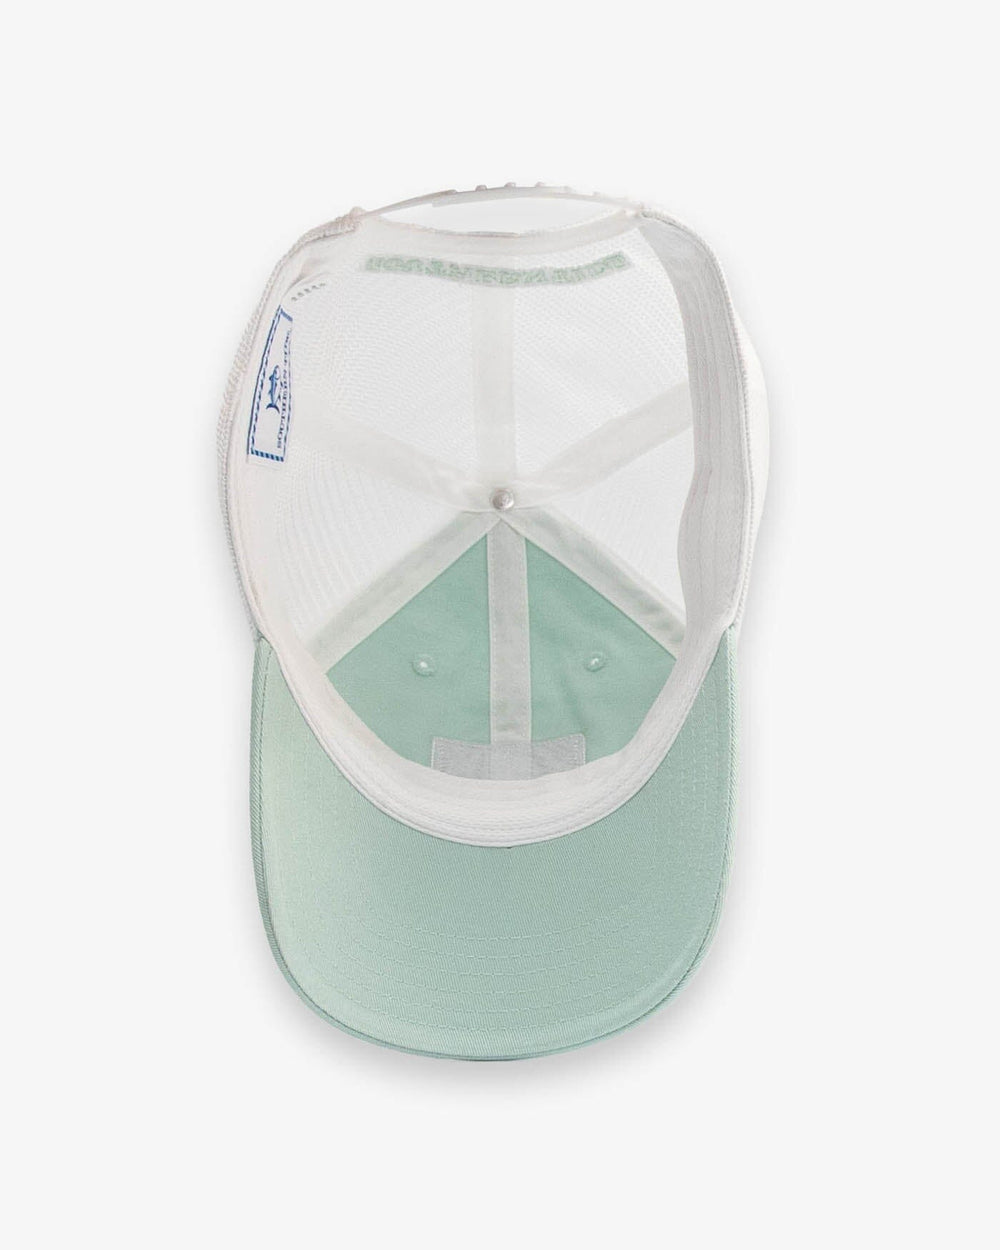 The detail view of the Southern Tide Sun Farer Skipjack Fly Patch Trucker Hat by Southern Tide - Surf Spray Sage